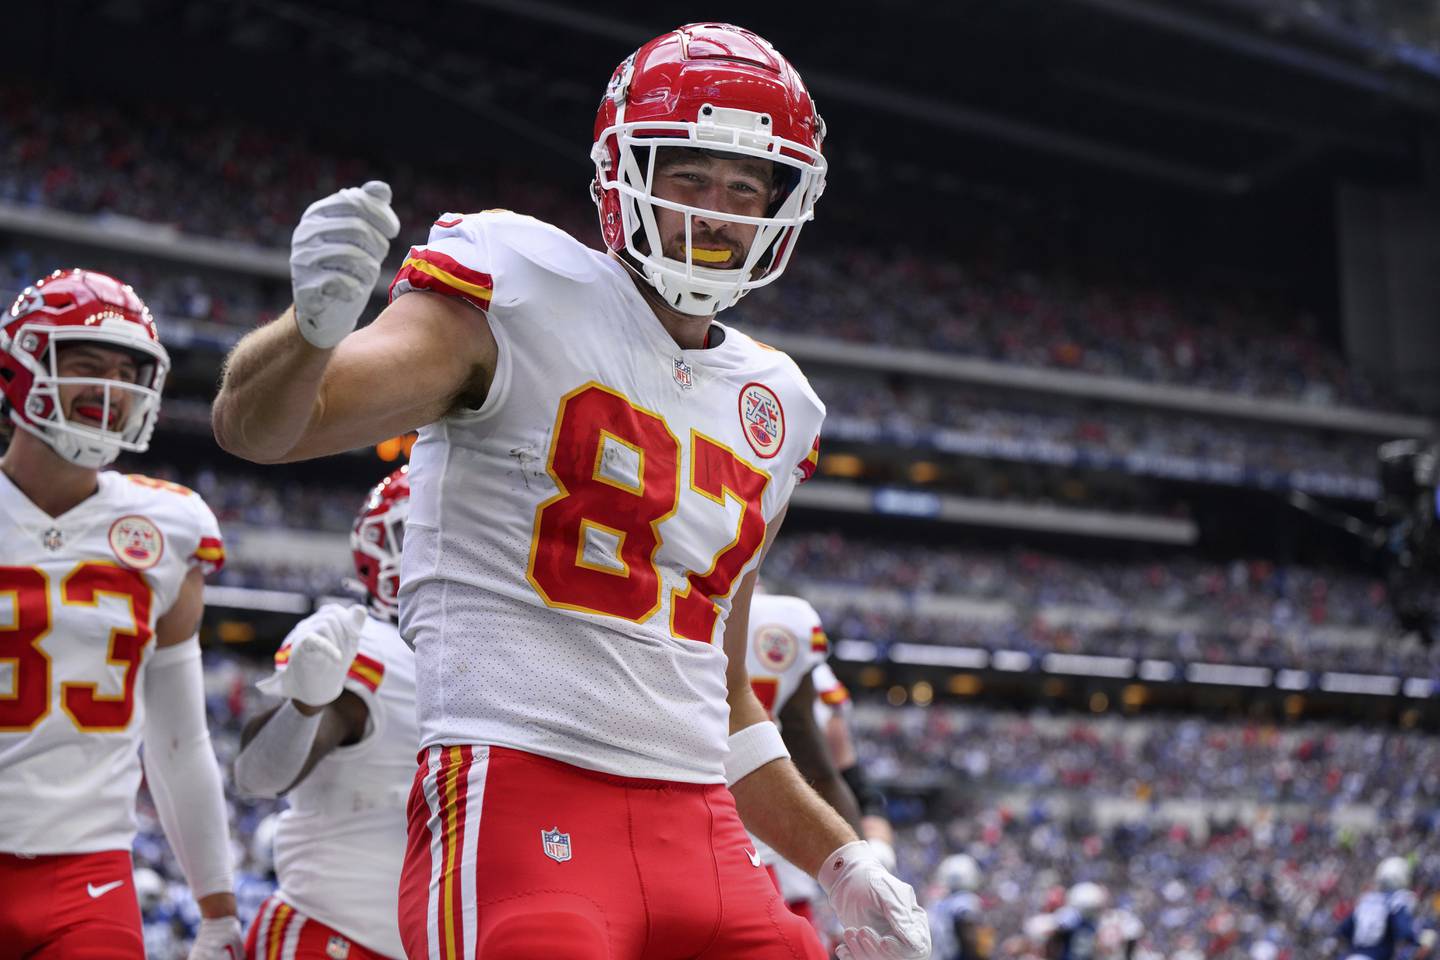 Kansas City Chiefs tight end Travis Kelce (87) celebrates a touchdown during an NFL football game against the Indianapolis Colts, Sunday, Sept. 25, 2022, in Indianapolis. (AP Photo/Zach Bolinger)